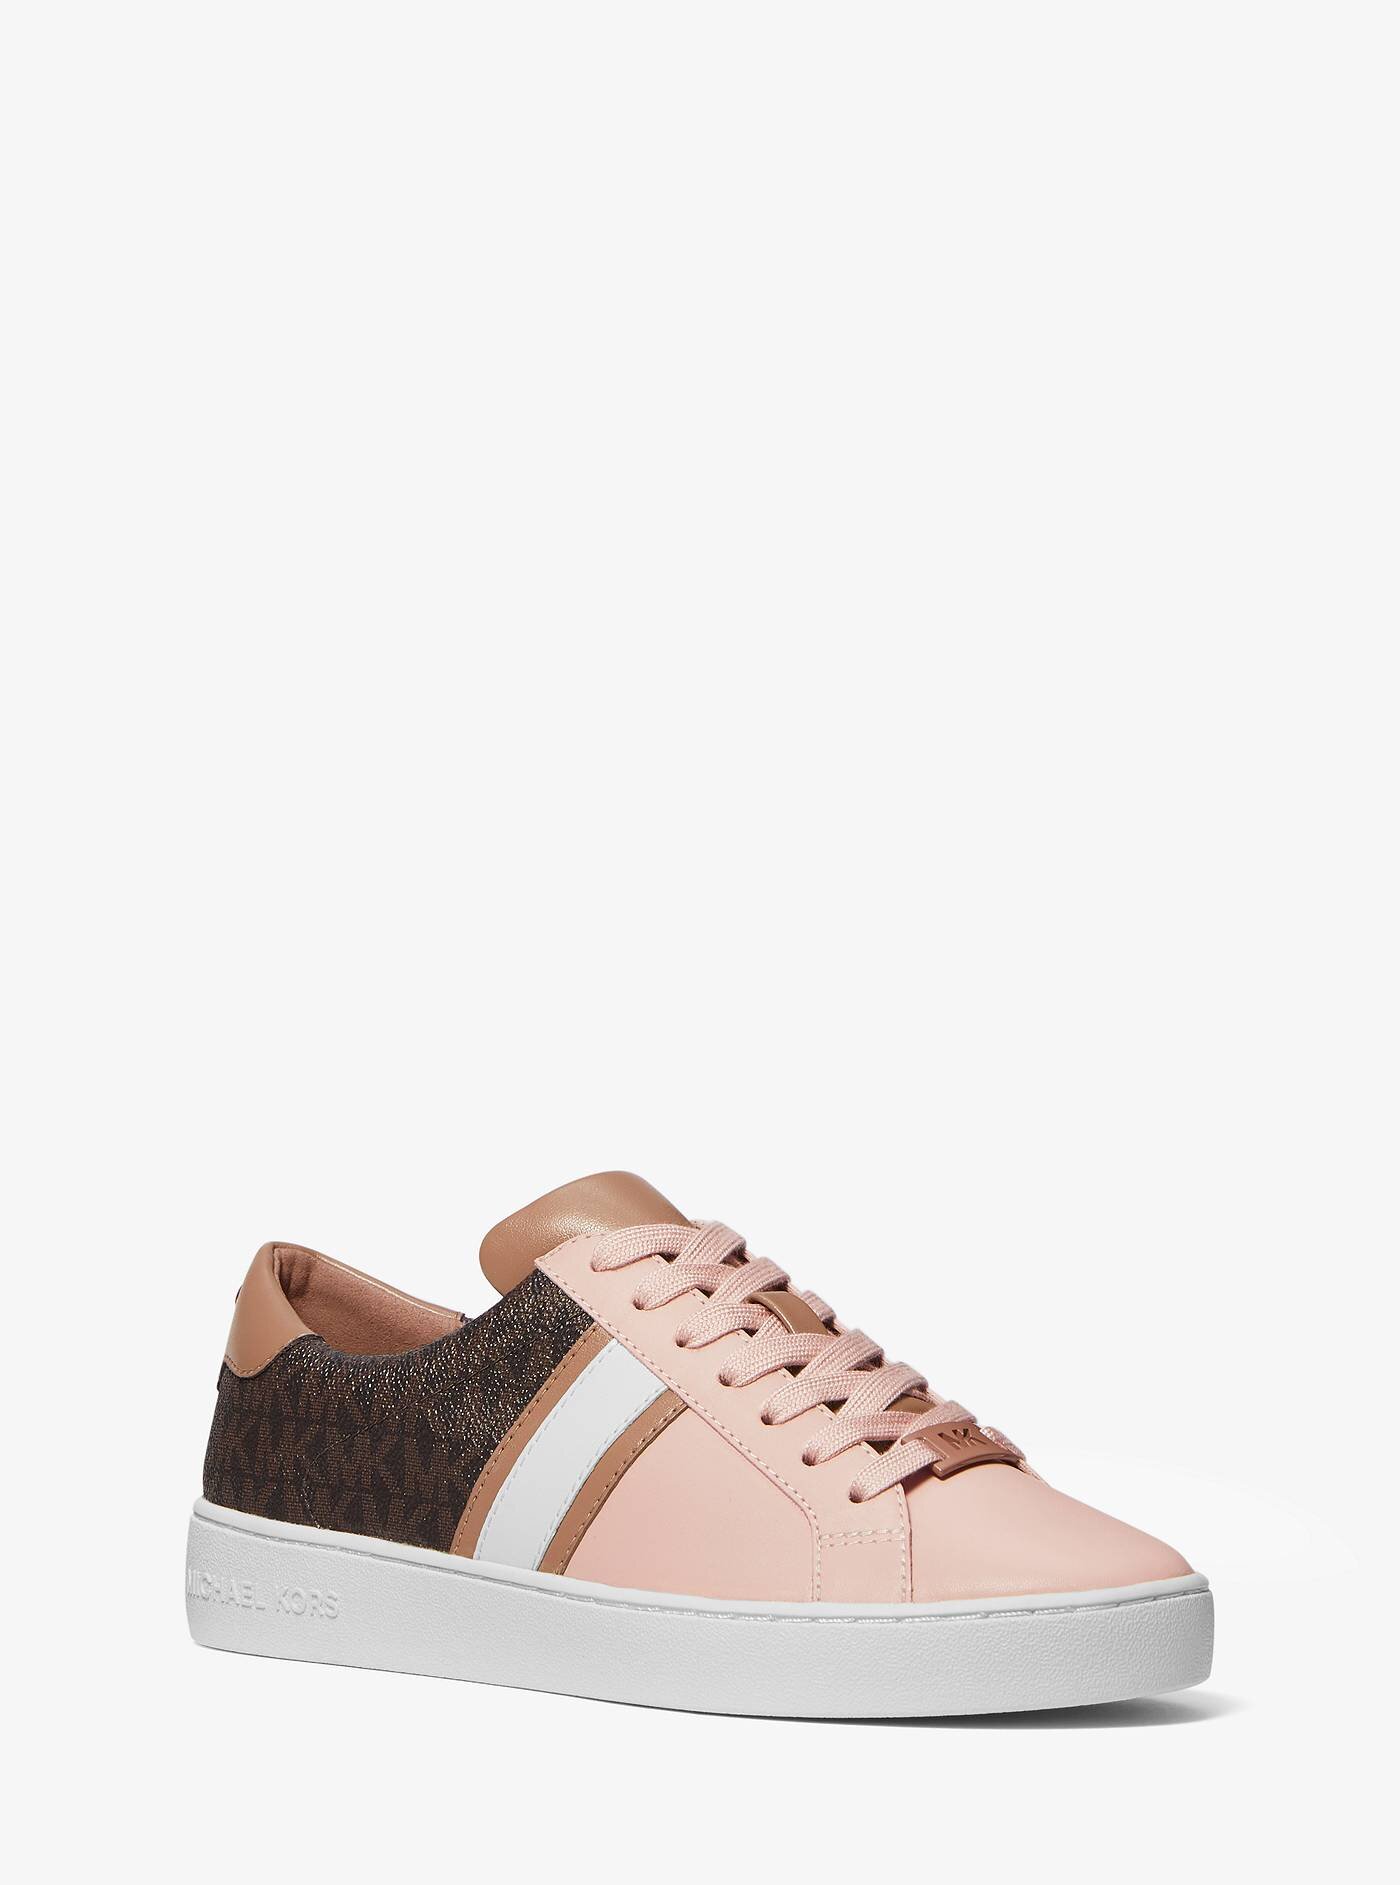 irving leather and logo stripe sneaker